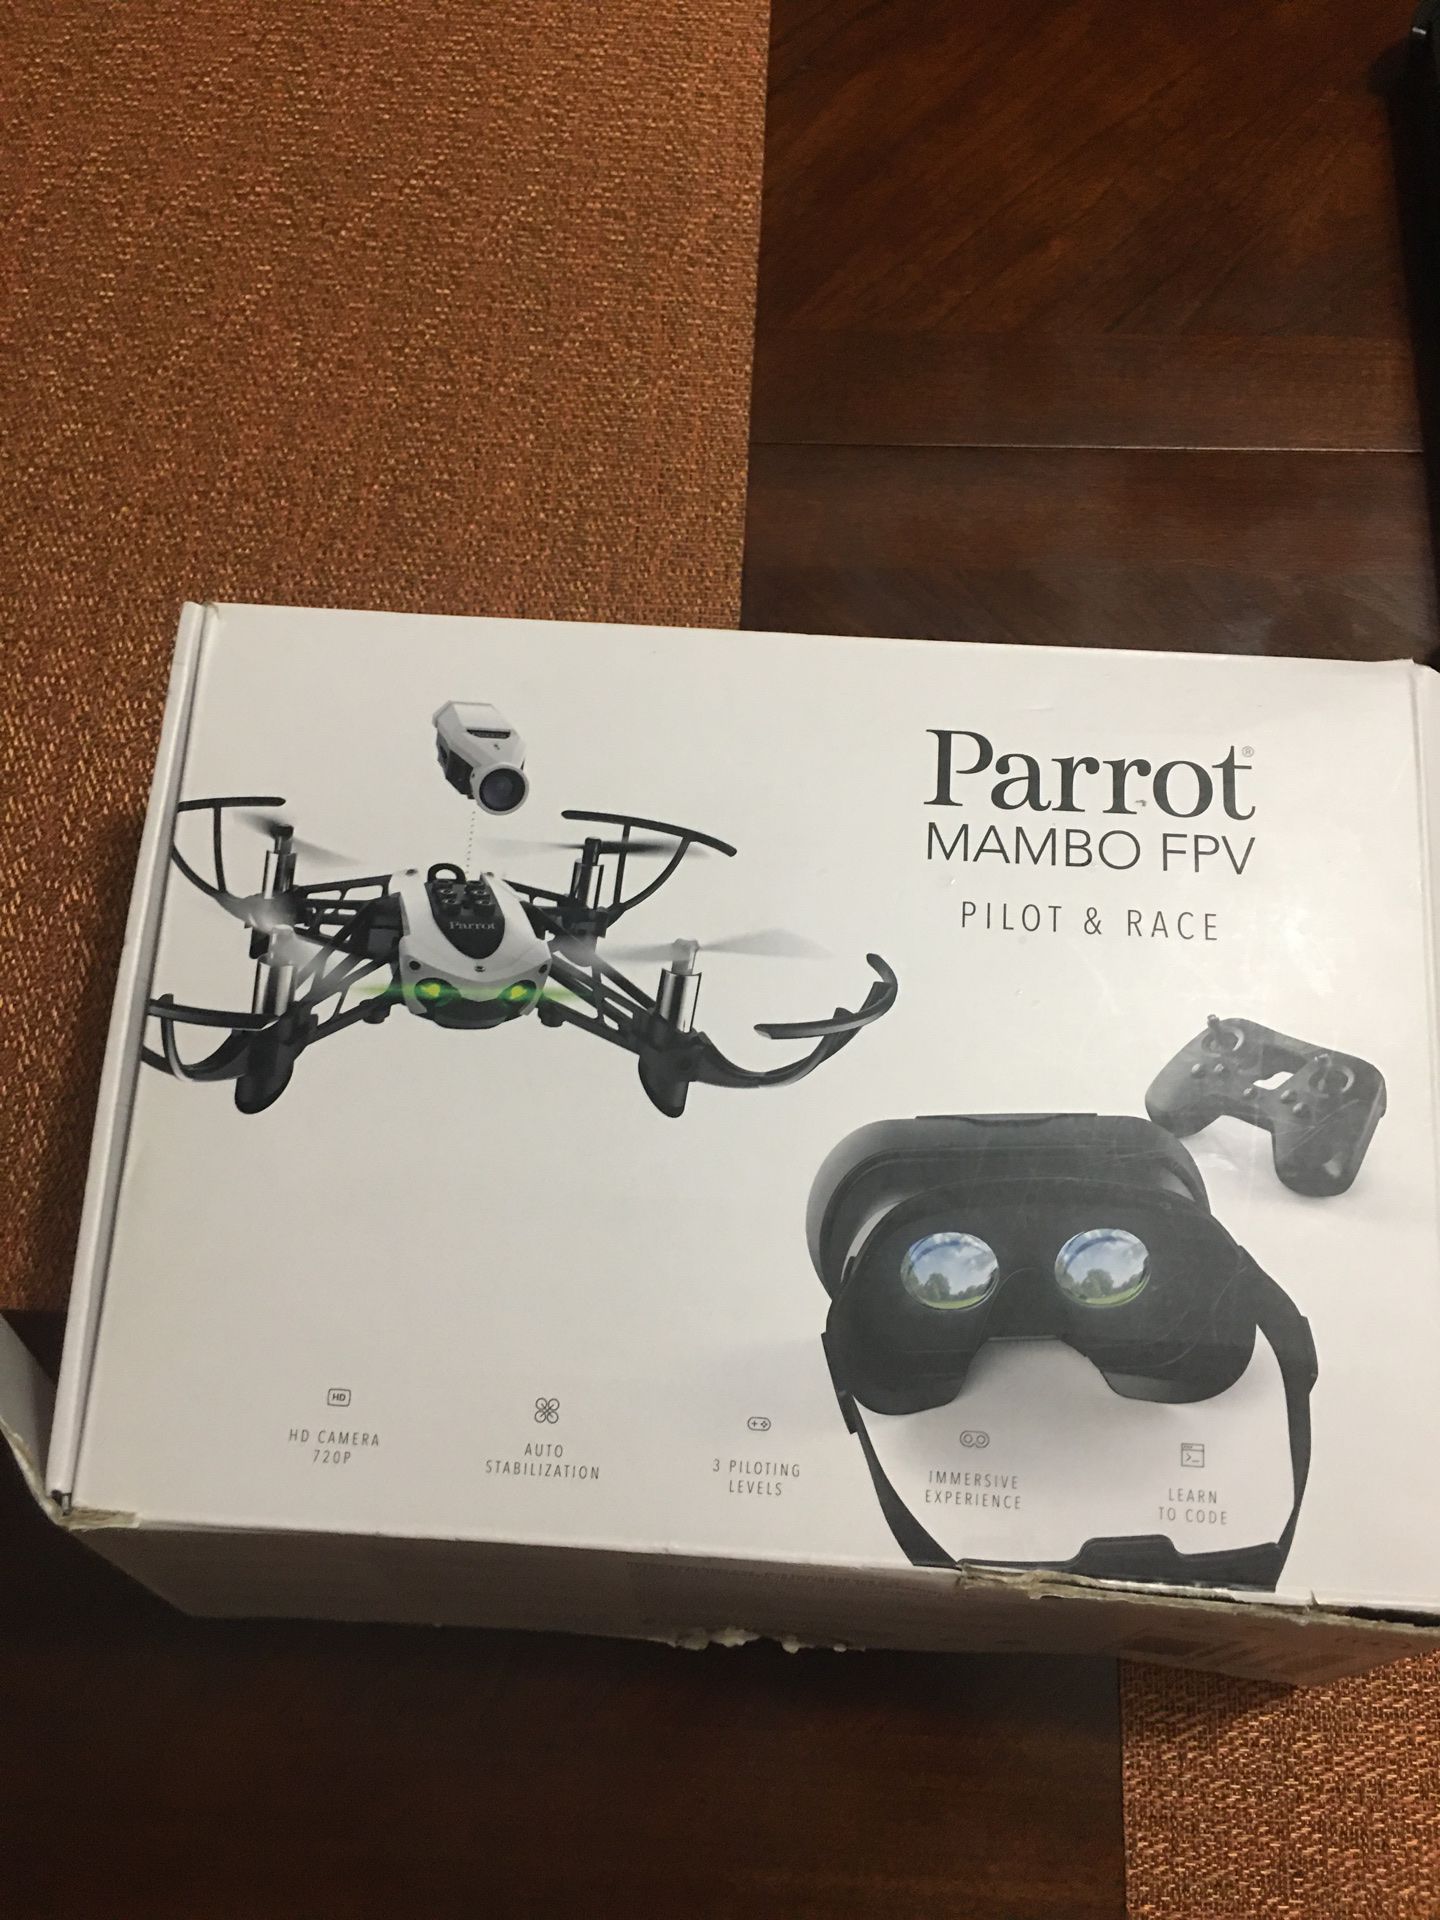 Drone: Parrot Mambo FPV